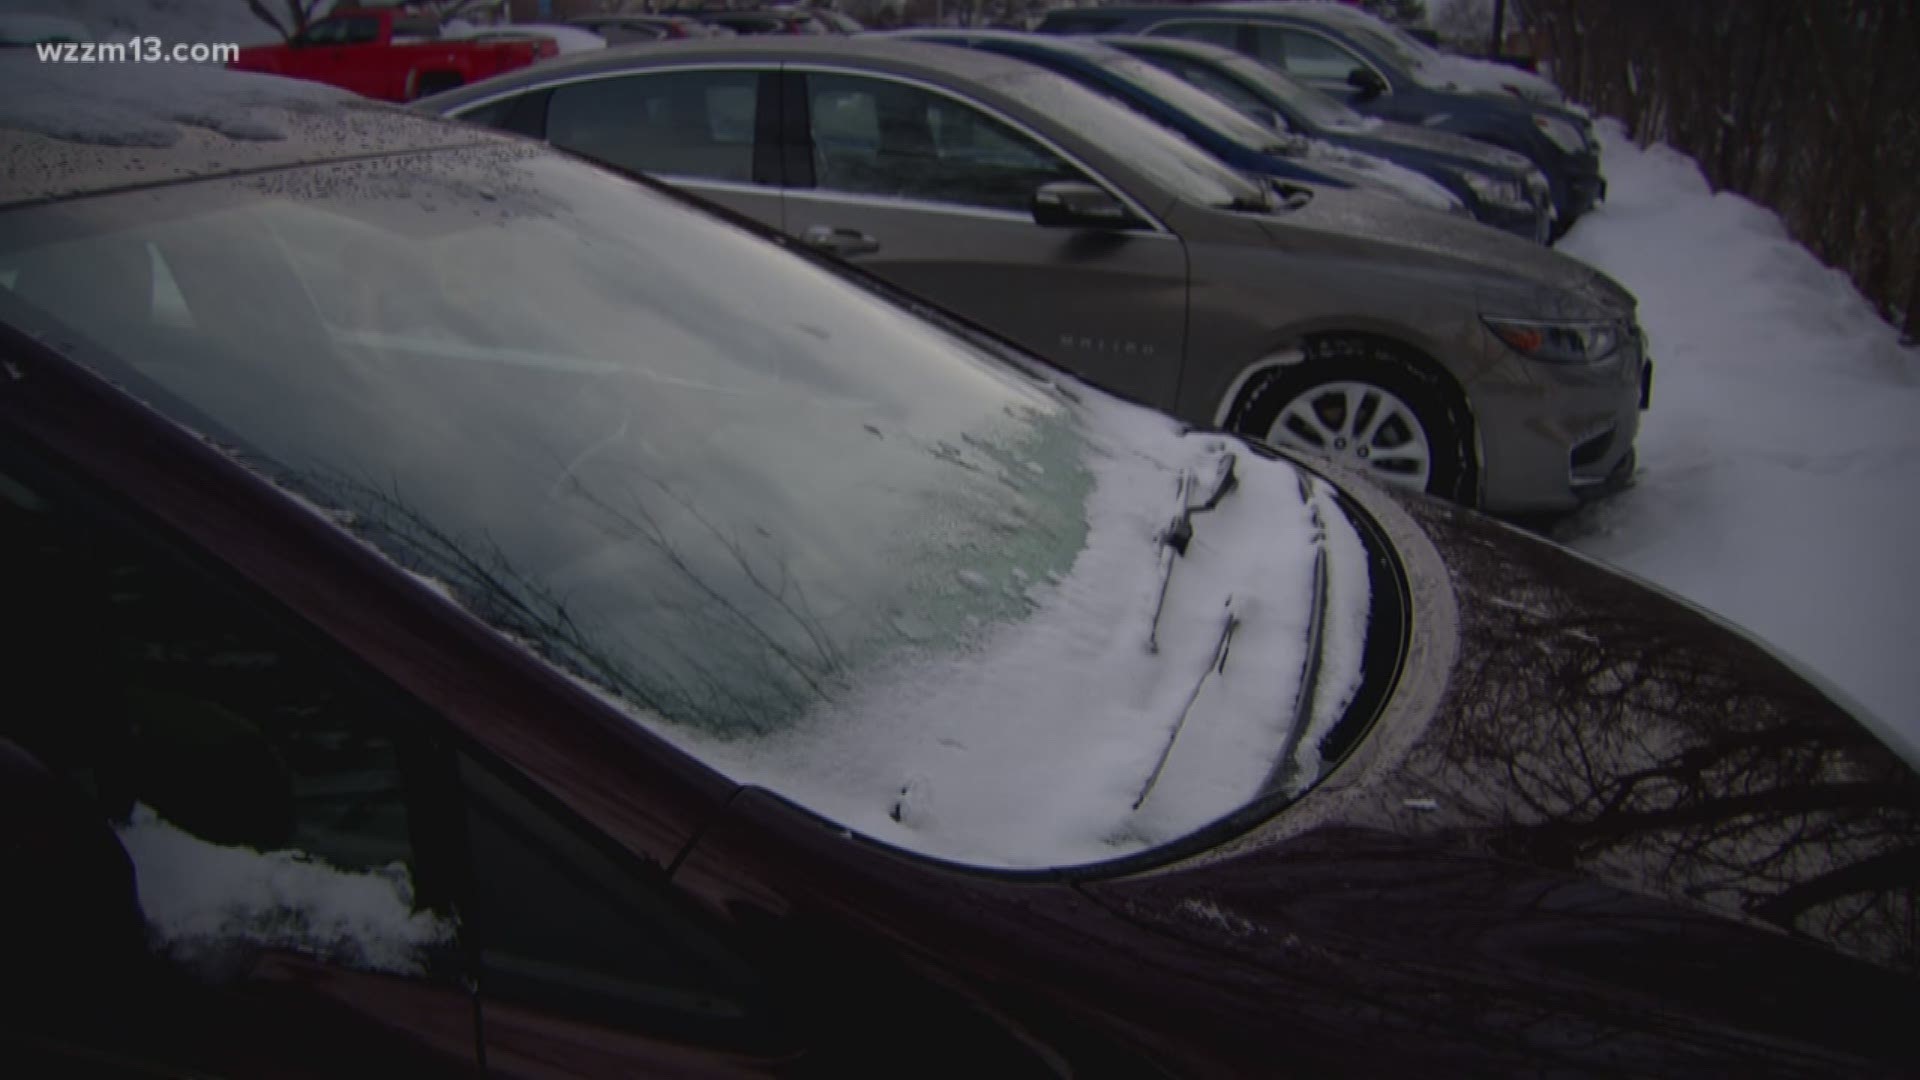 A Michigan lawmaker wants to make it mandatory that drivers turn on their headlights during bad weather, and at all times when the windshield wipers are activated.